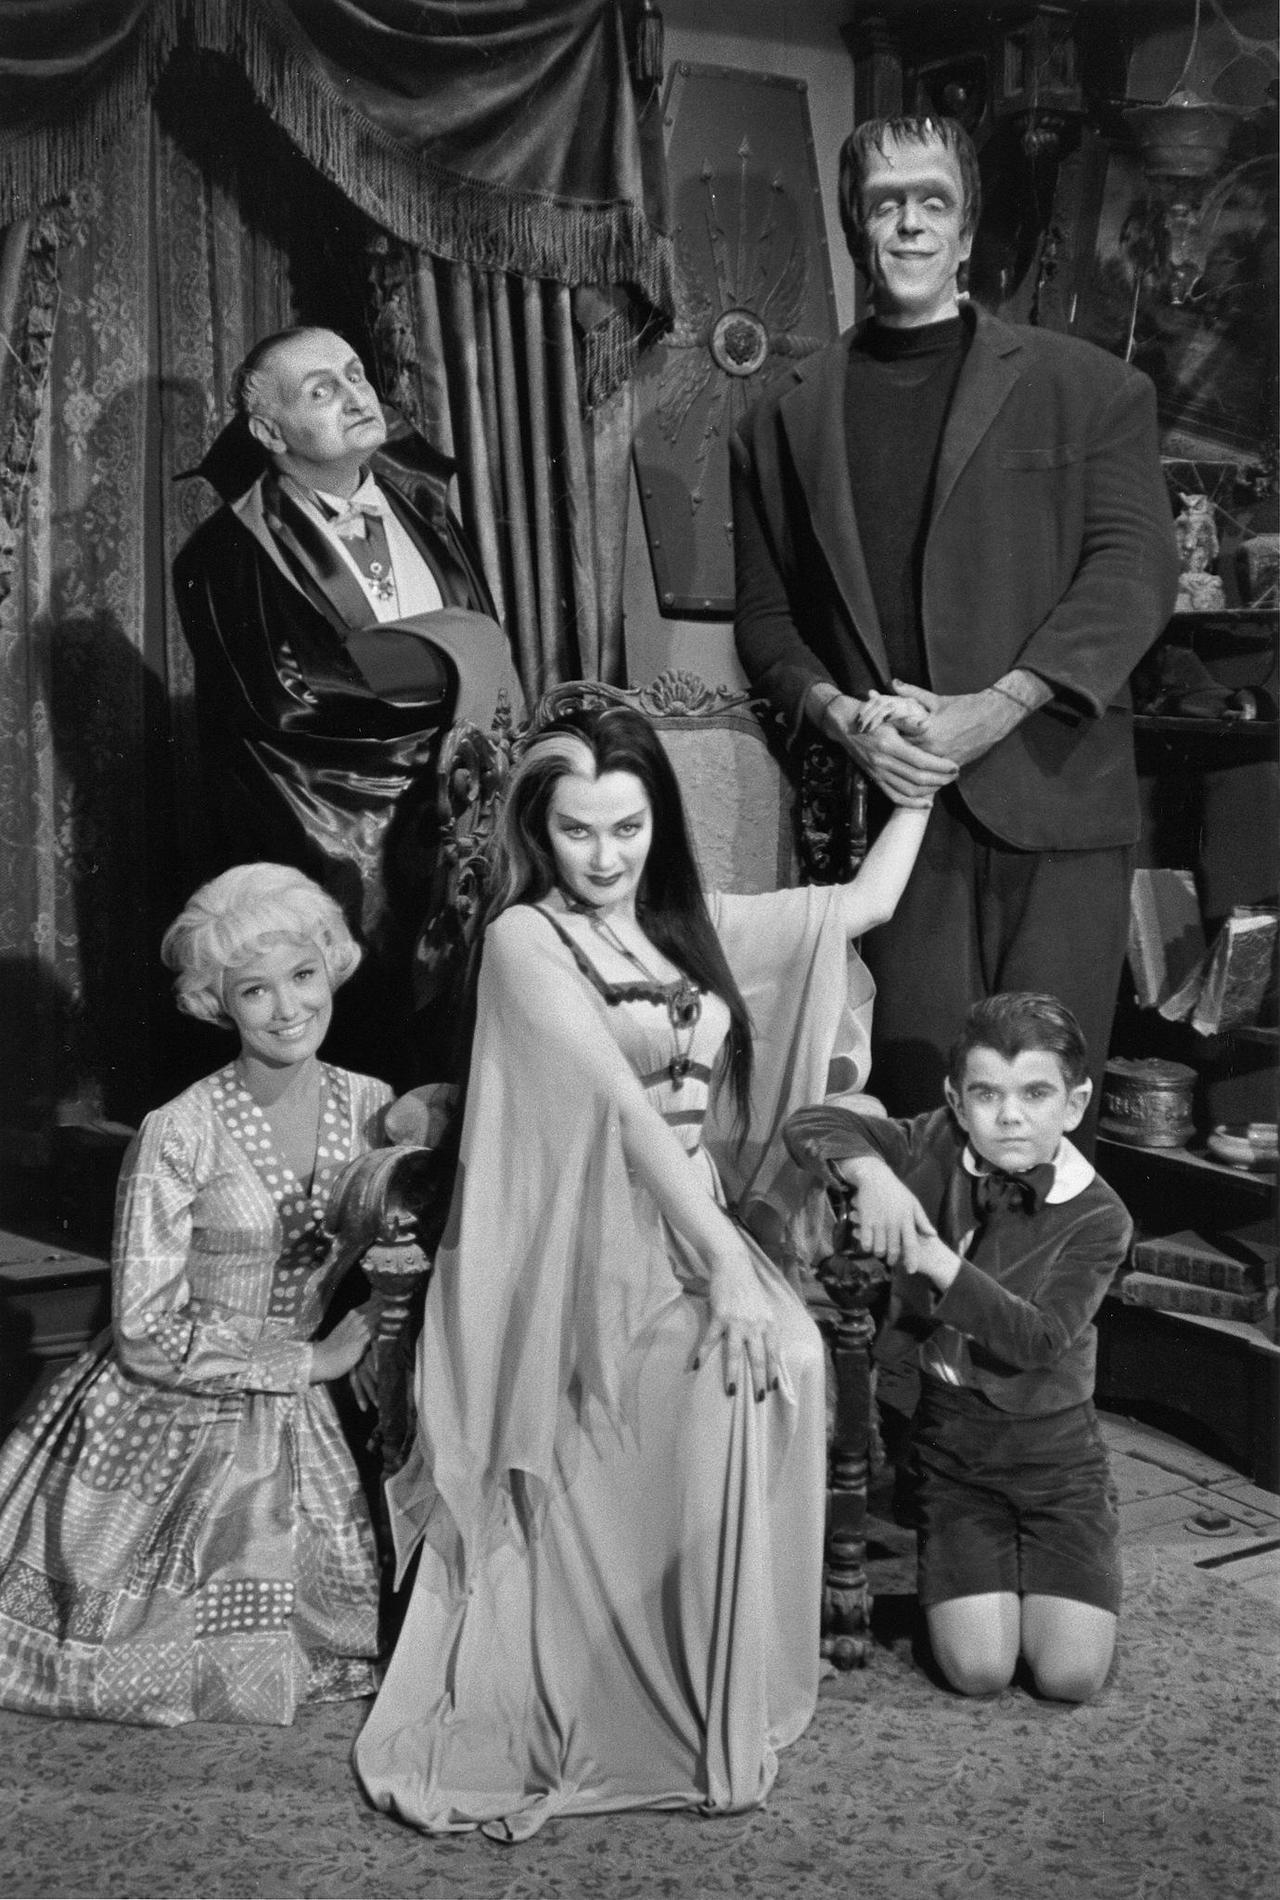 The Munsters Images. 